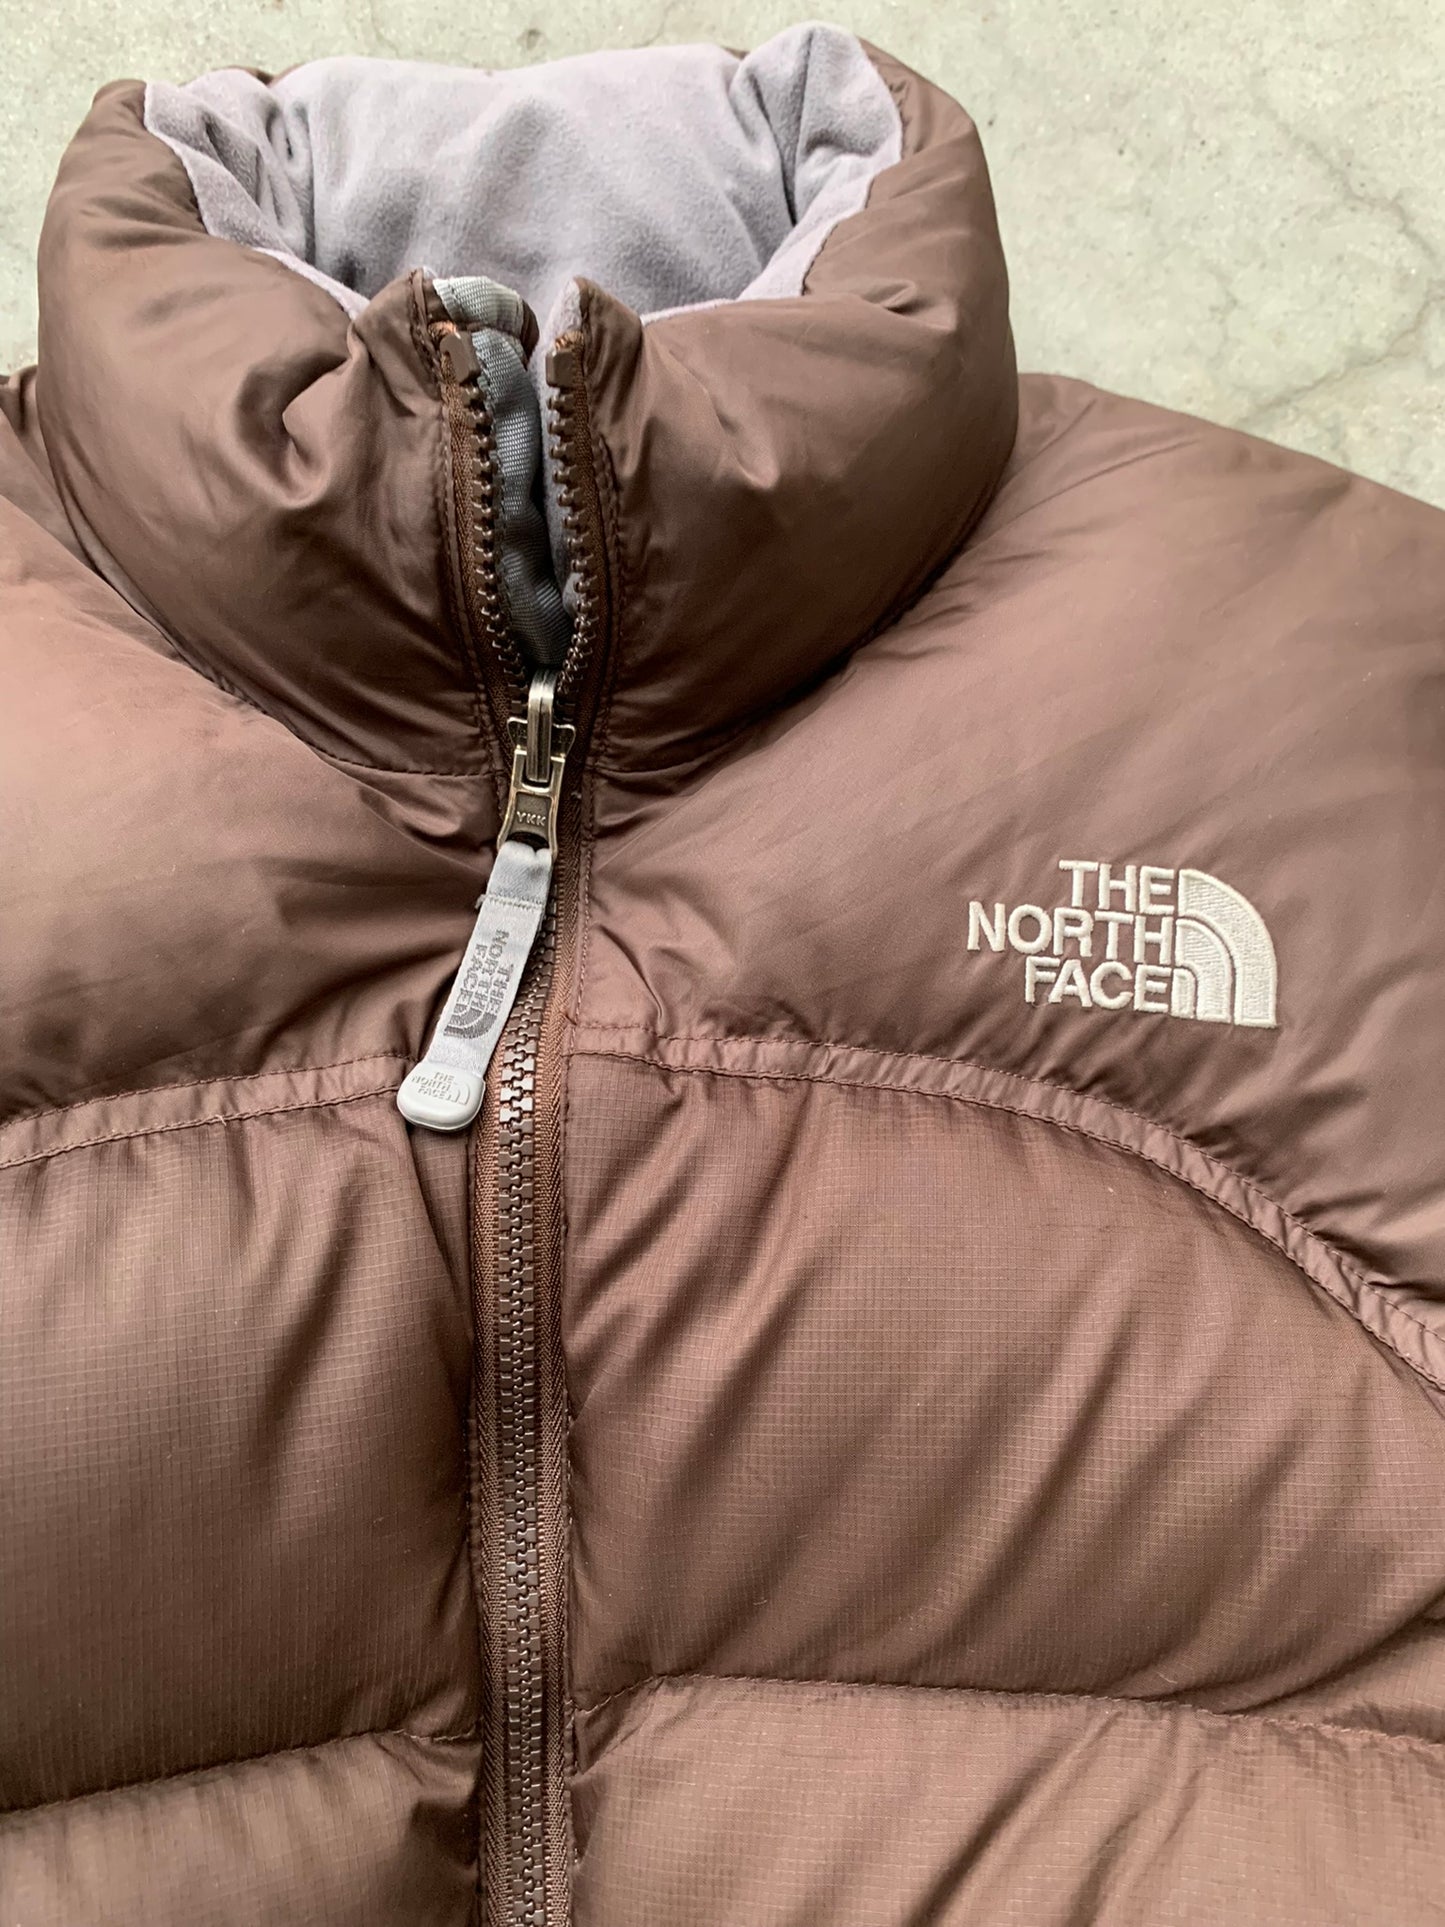 (S) The North Face 700 Choc Brown Puffer